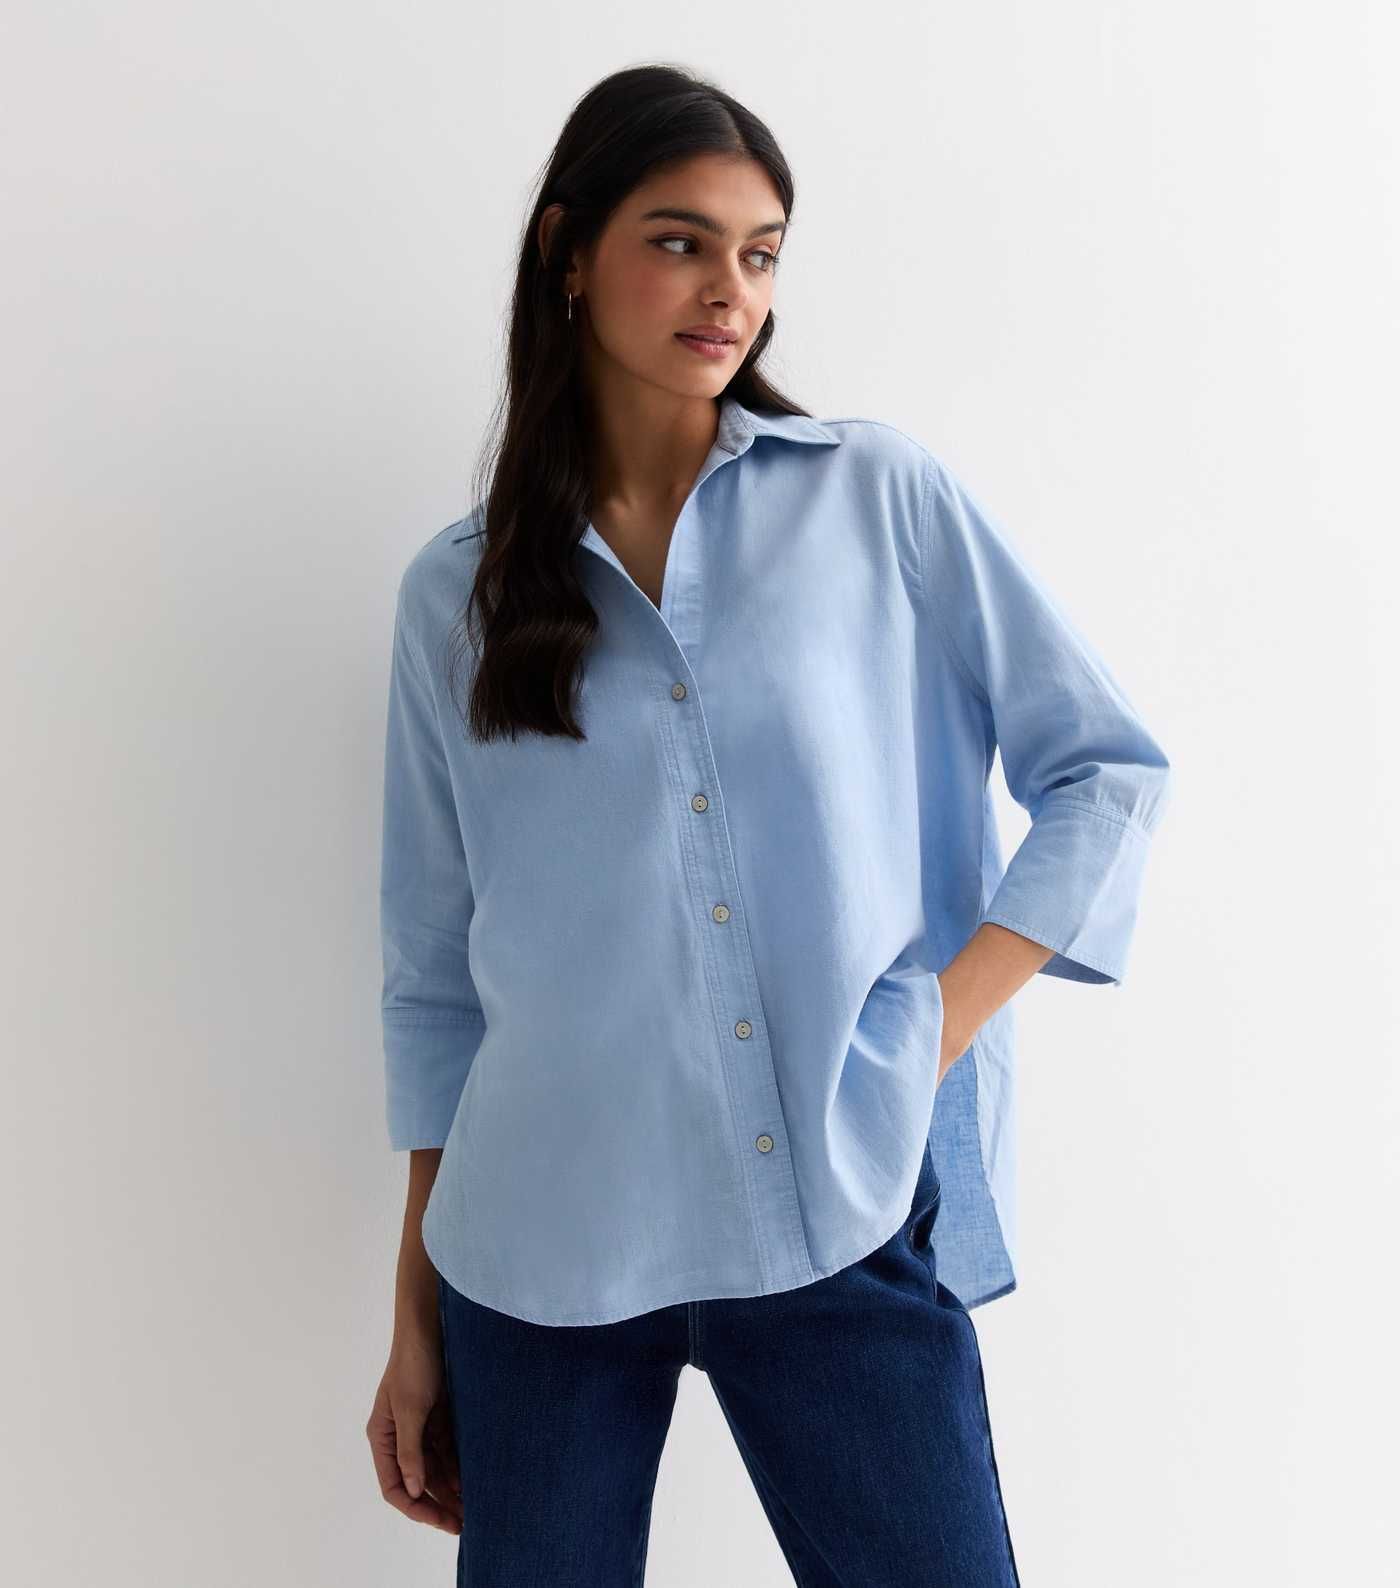 Blue Linen-Look 3/4 Sleeve Shirt
						
						Add to Saved Items
						Remove from Saved Items | New Look (UK)